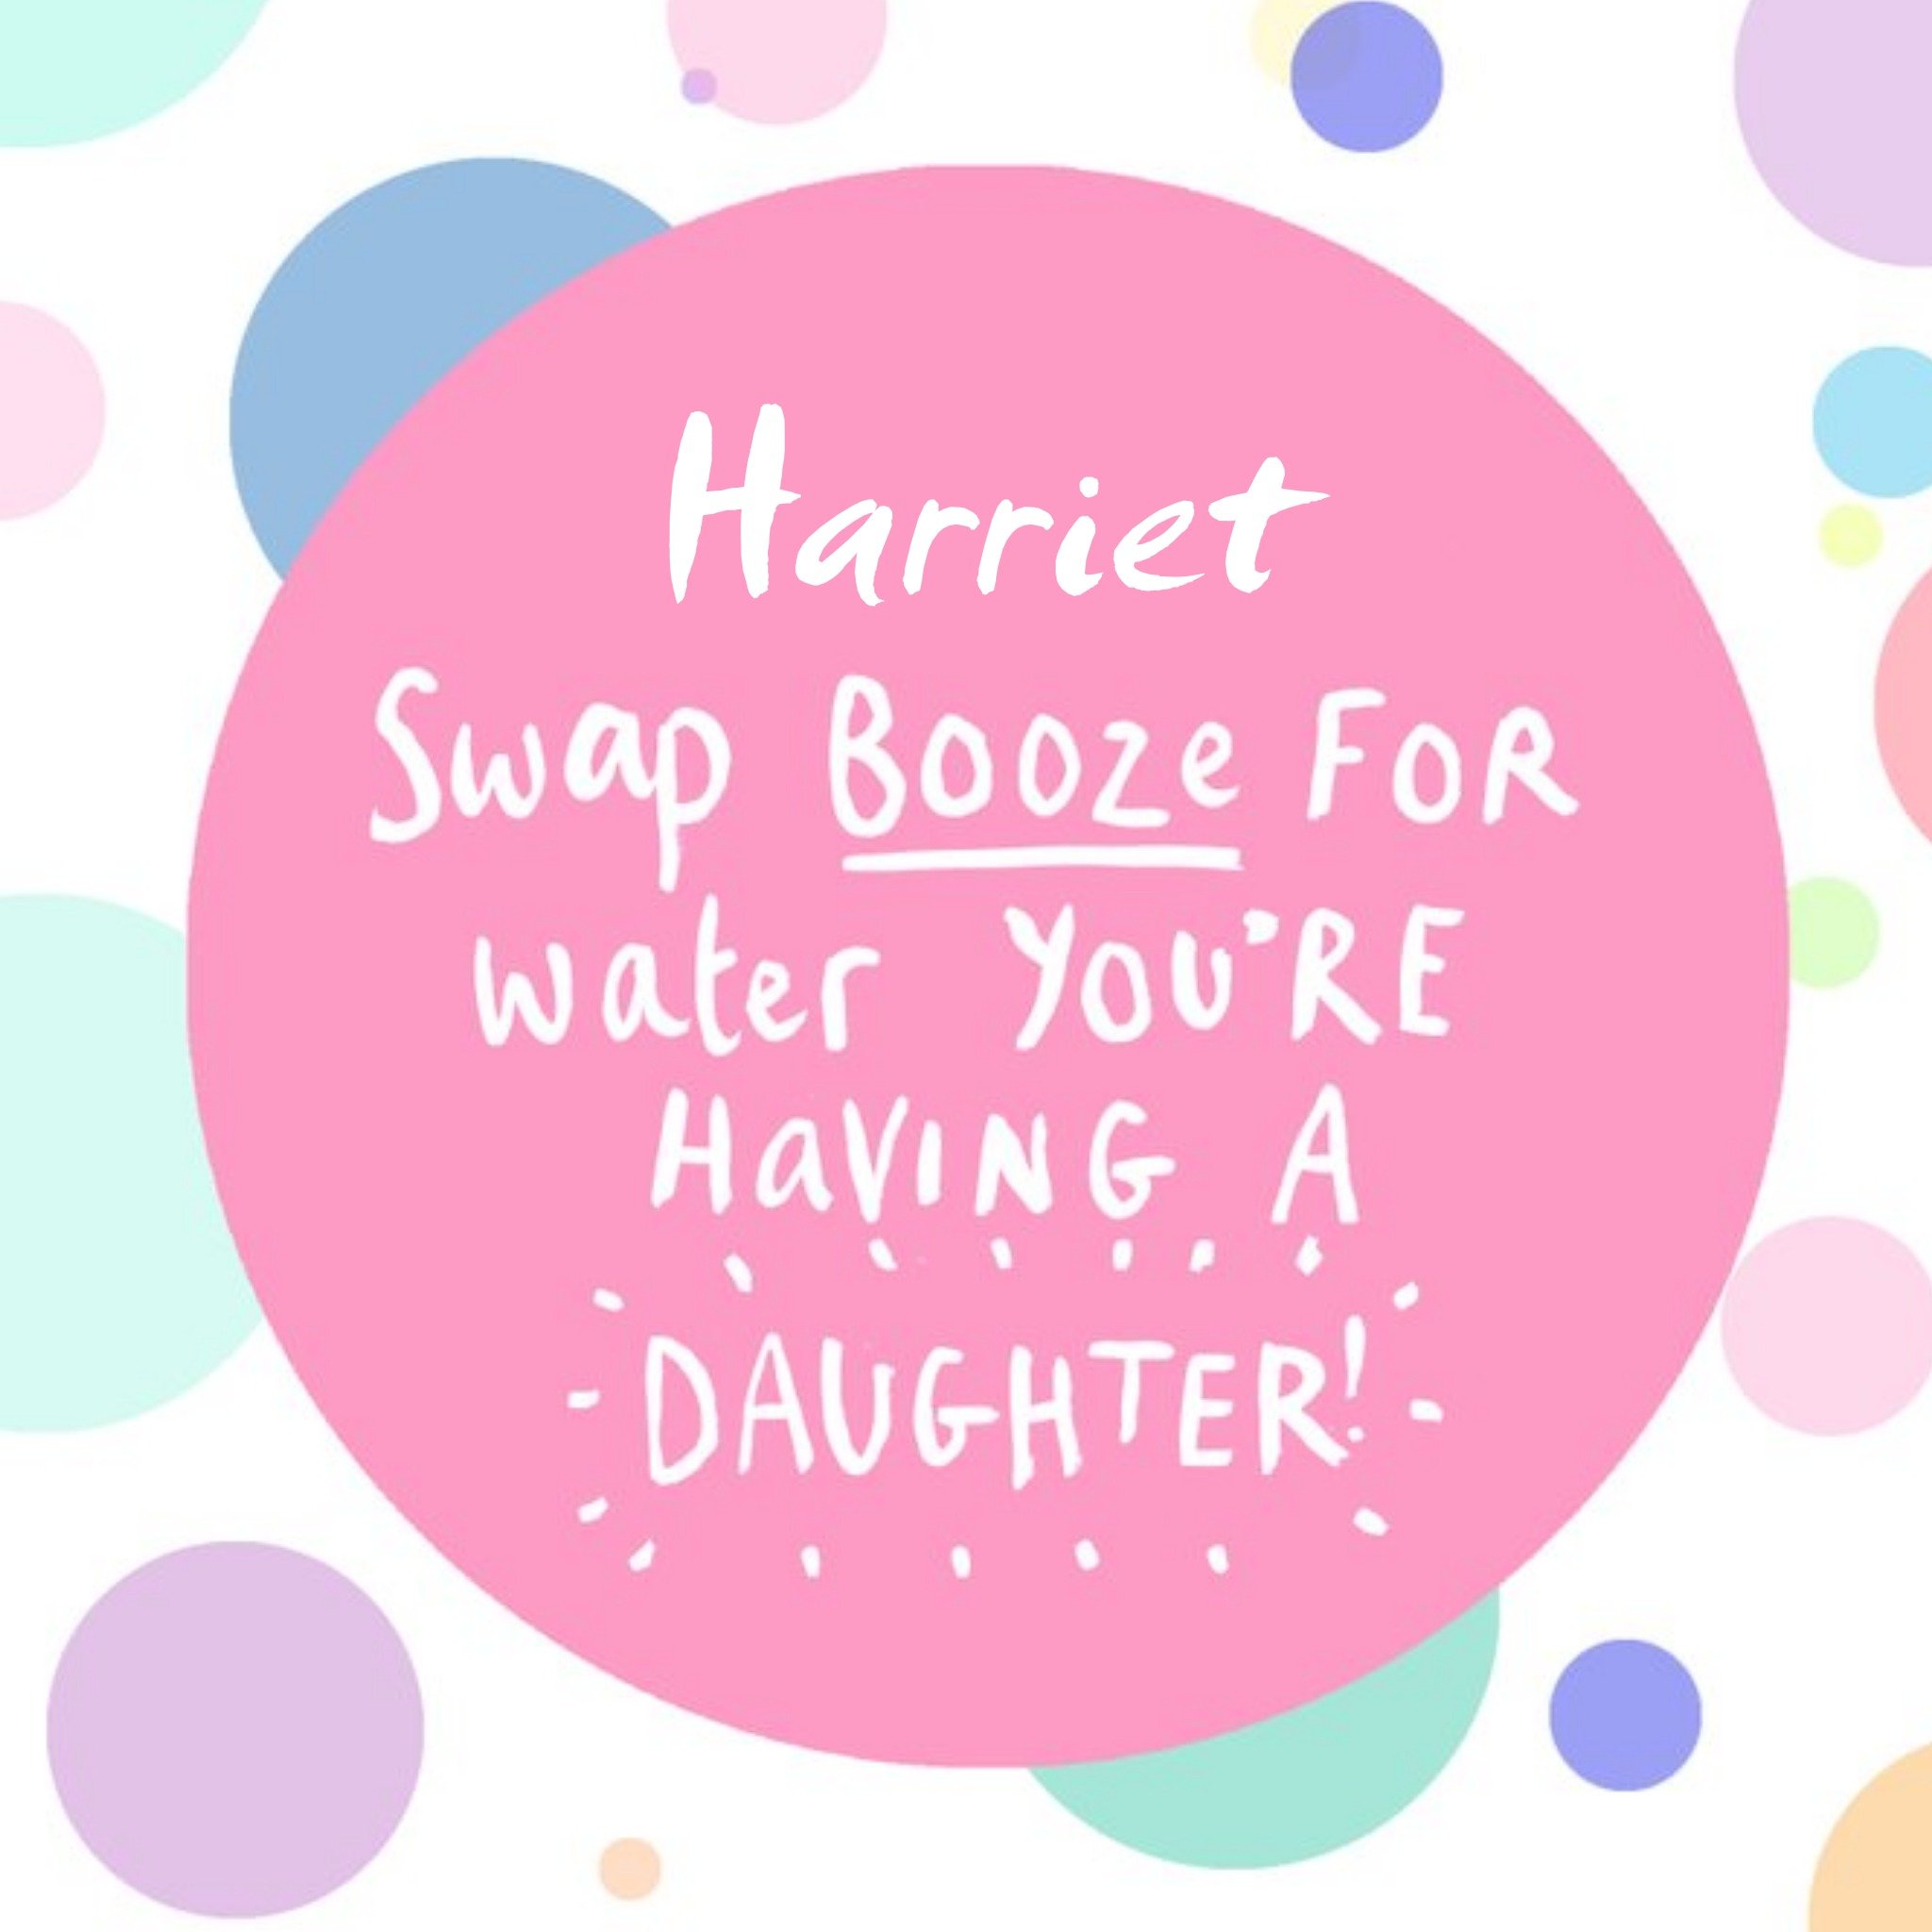 Moonpig Swap Booze For Water You're Having A Daughter Personalised Congratulations Card, Square